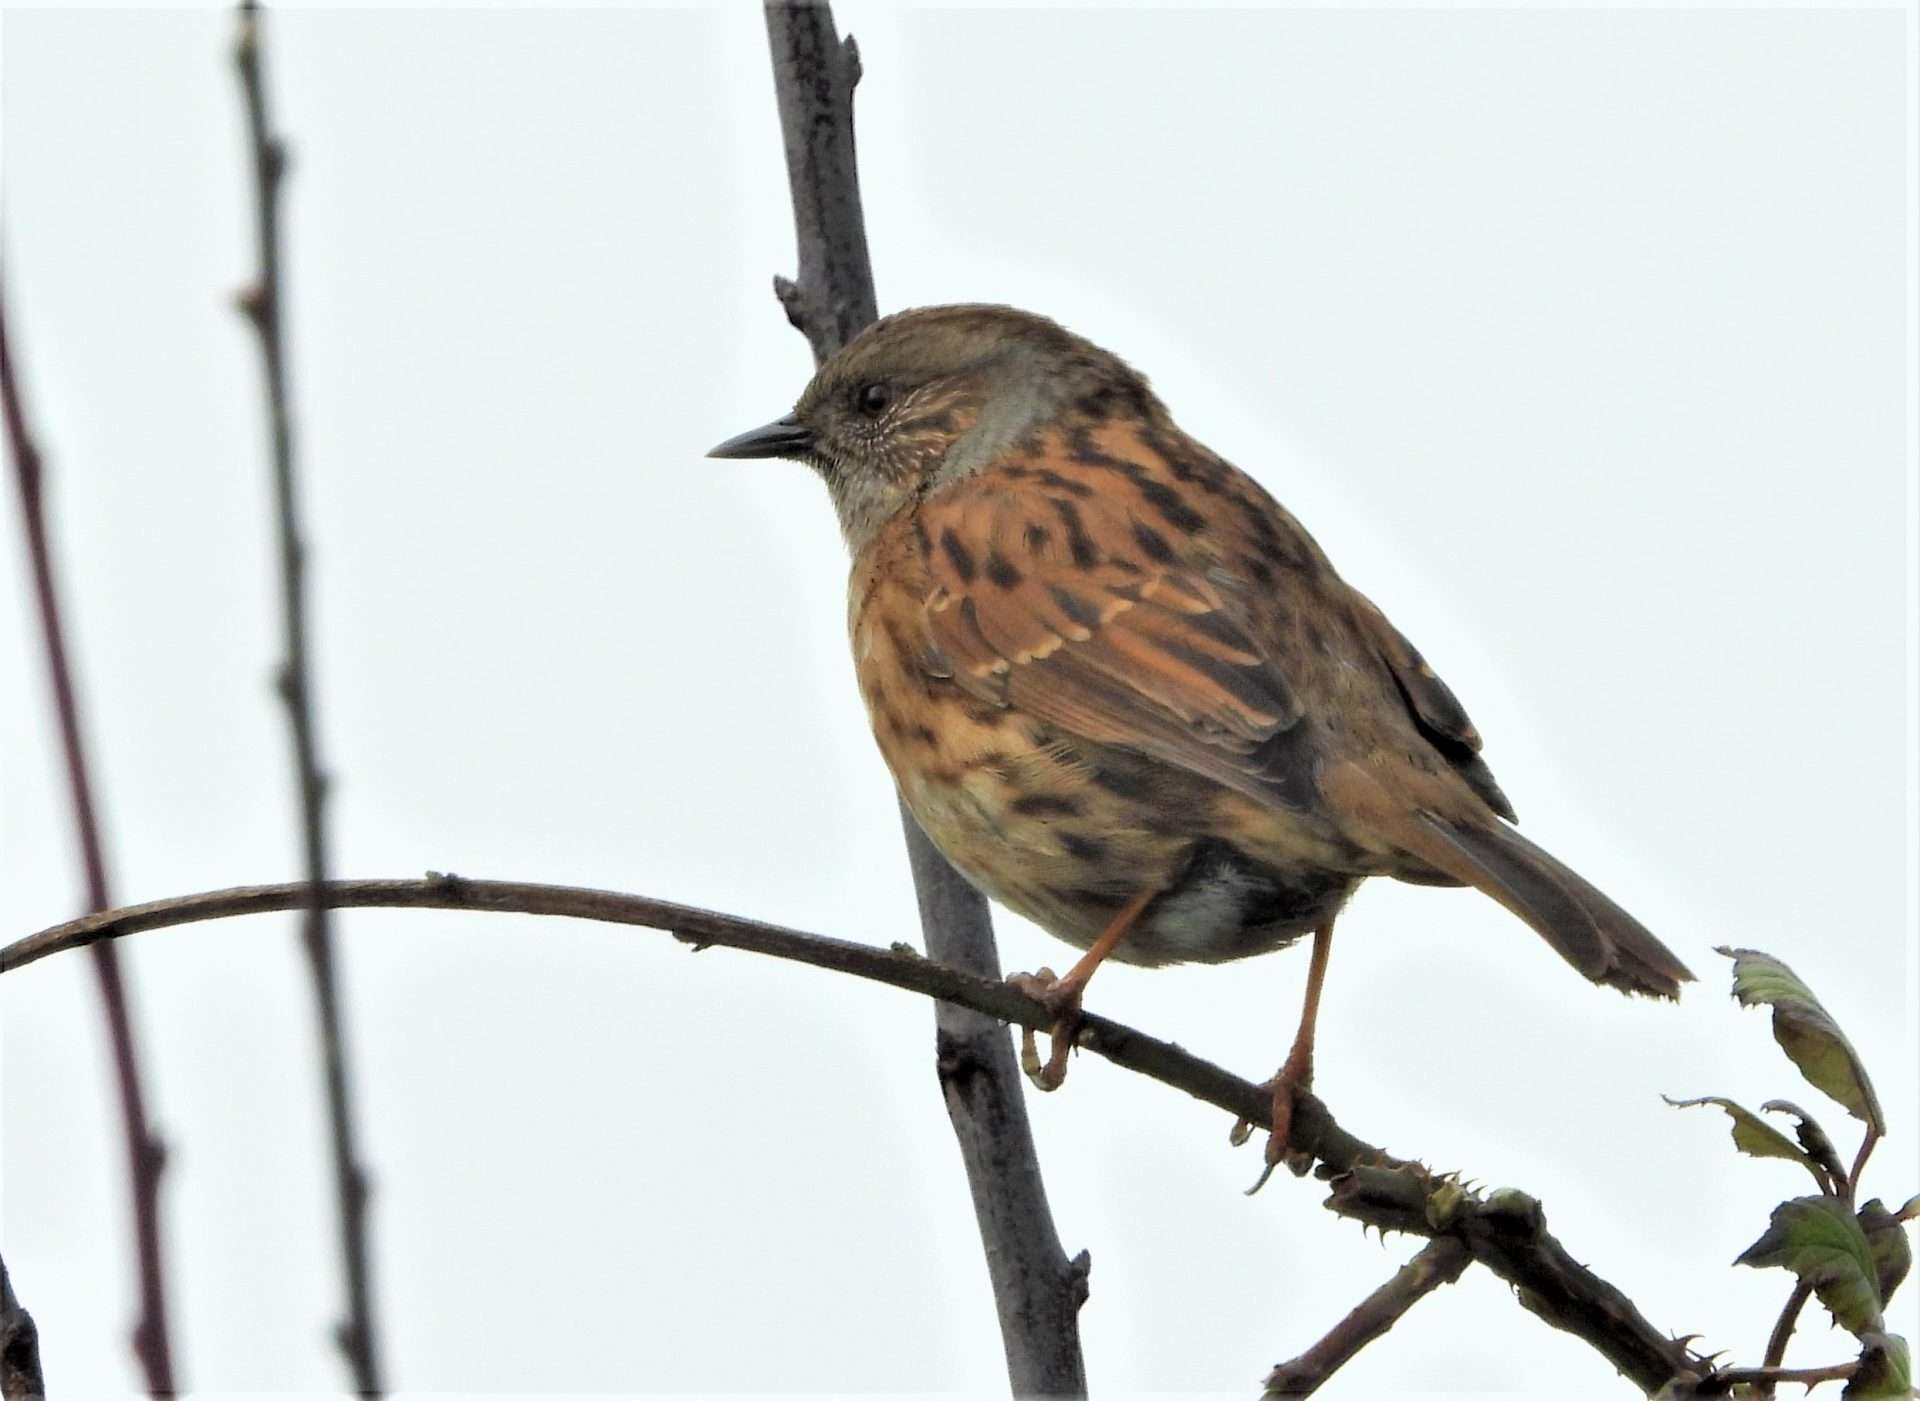 Dunnock by Kenneth Bradley at Combe cellars